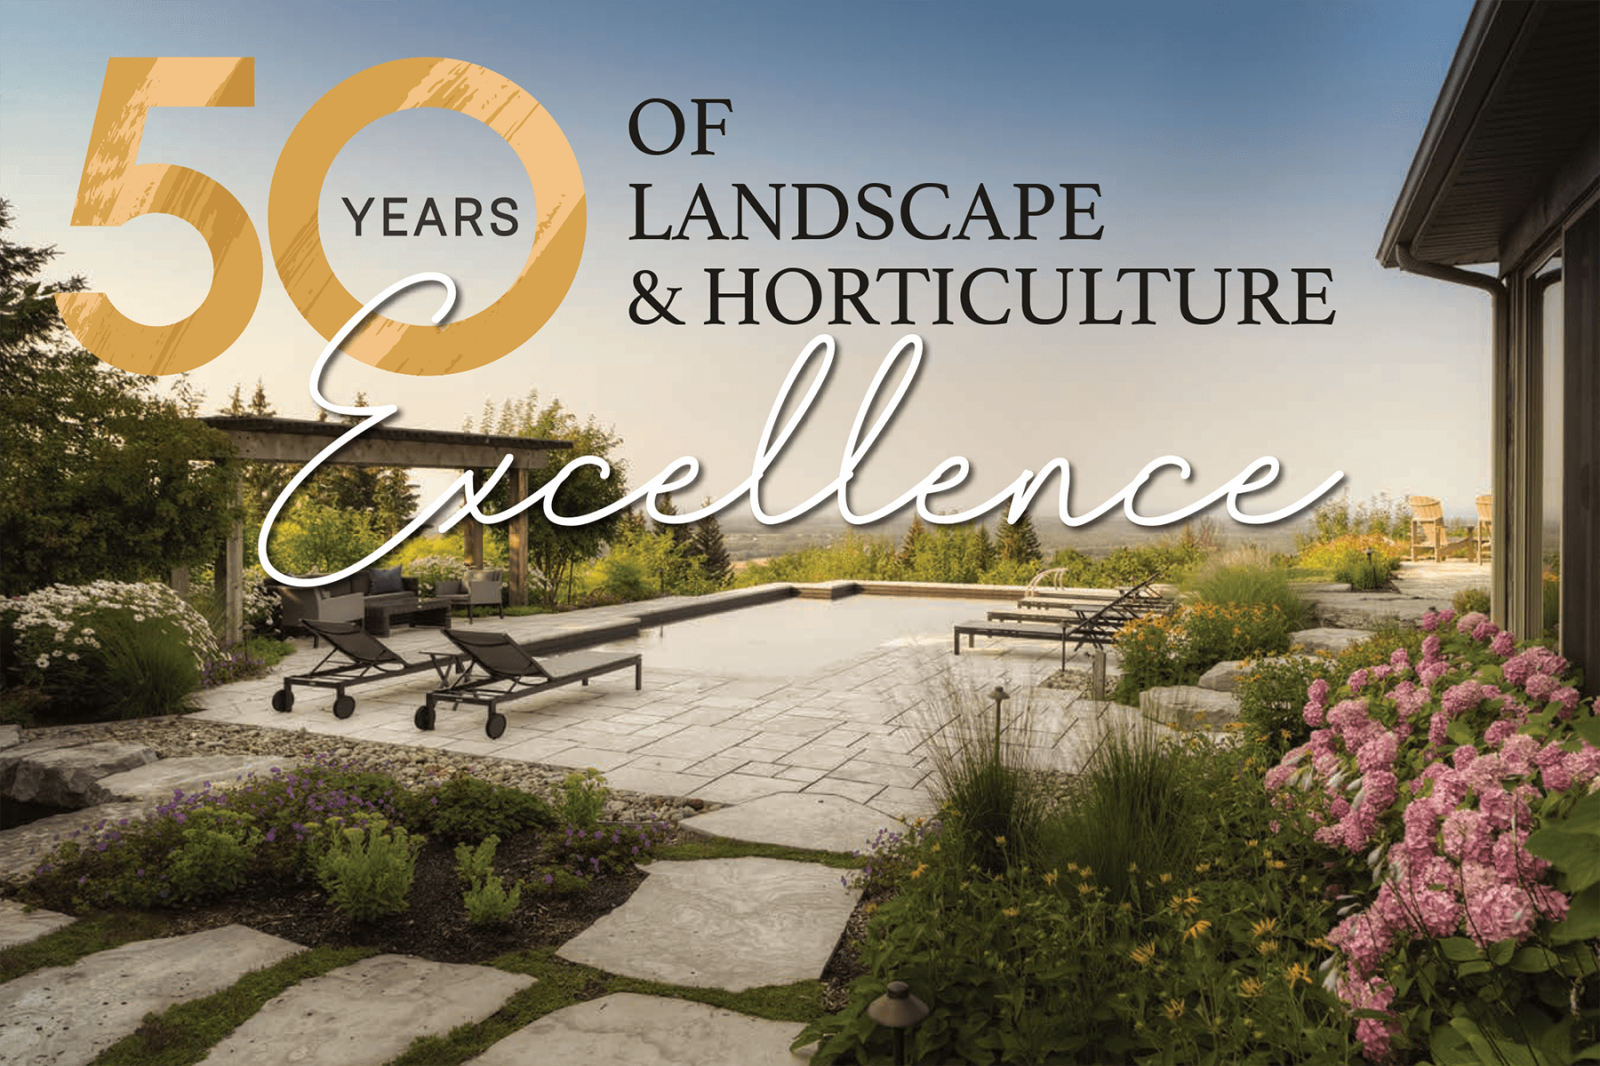 50 years of landscape and horticulture excellence